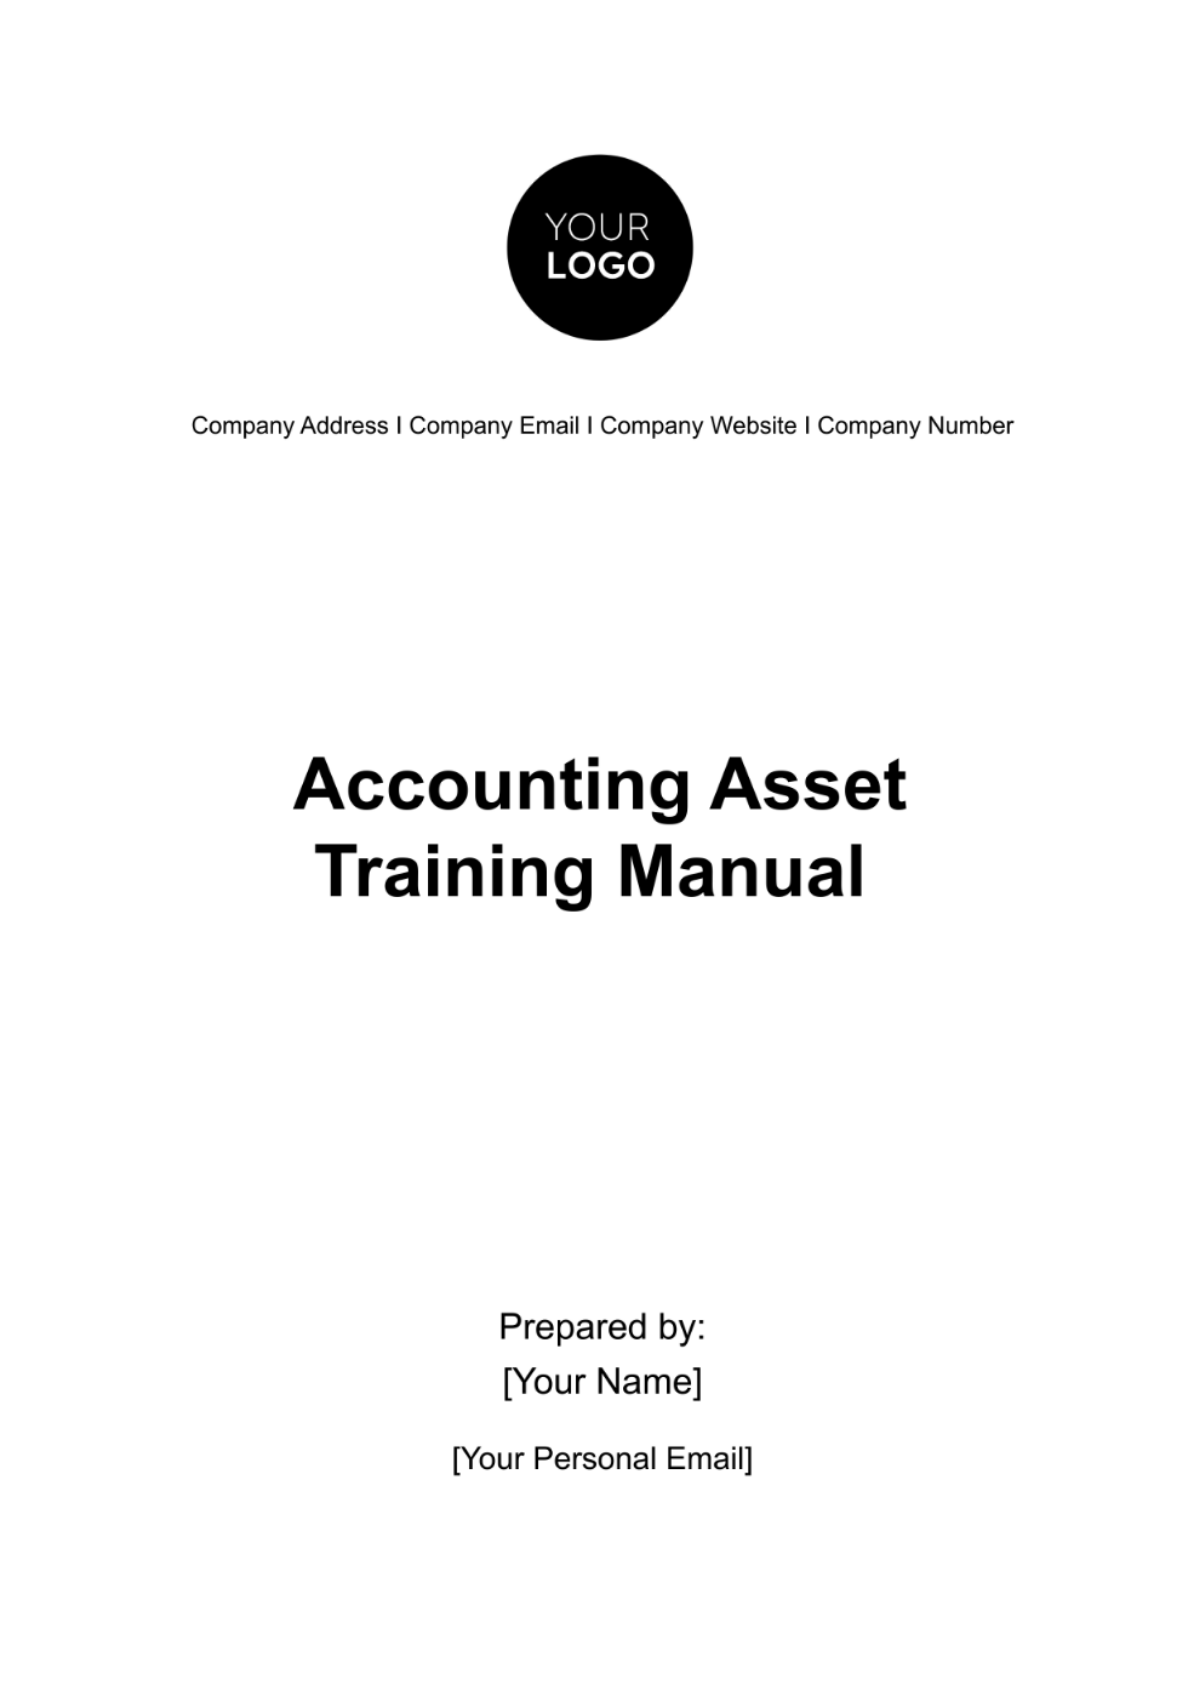 Free Accounting Asset Training Manual Template